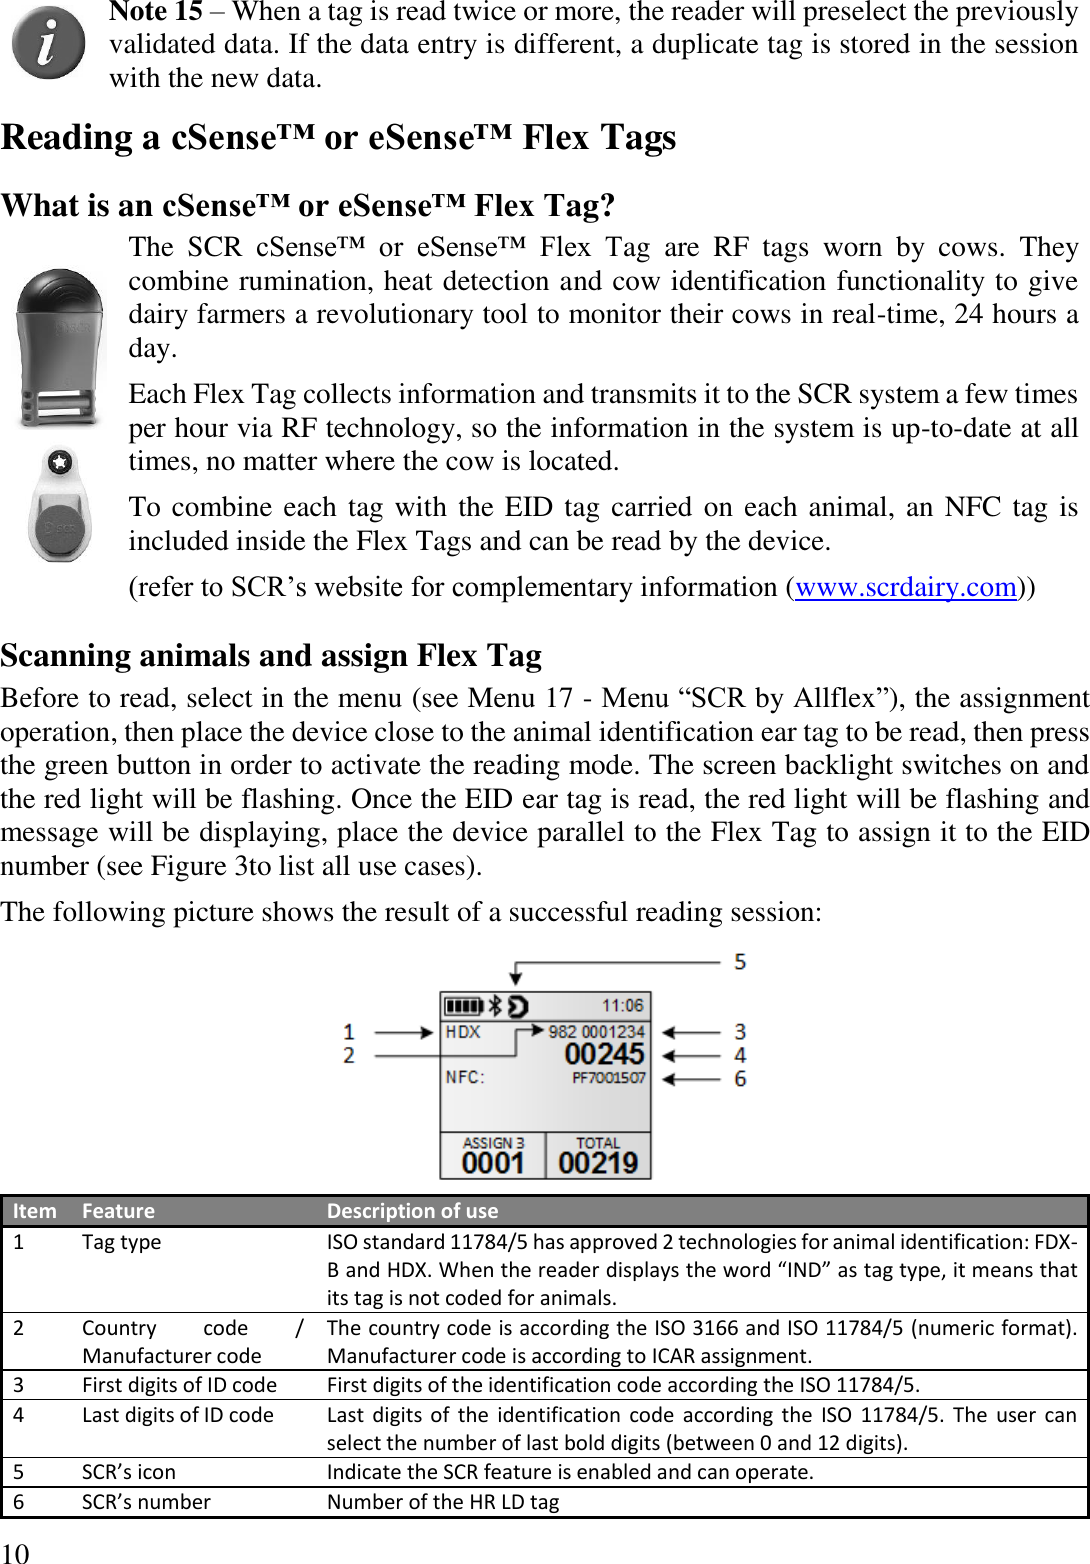 10  Note 15 – When a tag is read twice or more, the reader will preselect the previously validated data. If the data entry is different, a duplicate tag is stored in the session with the new data. Reading a cSense™ or eSense™ Flex Tags What is an cSense™ or eSense™ Flex Tag?   The  SCR  cSense™  or  eSense™  Flex  Tag  are  RF  tags  worn  by  cows.  They combine rumination, heat detection and cow identification functionality to give dairy farmers a revolutionary tool to monitor their cows in real-time, 24 hours a day. Each Flex Tag collects information and transmits it to the SCR system a few times per hour via RF technology, so the information in the system is up-to-date at all times, no matter where the cow is located. To combine each tag with the EID tag carried on each animal, an NFC tag is included inside the Flex Tags and can be read by the device. (refer to SCR’s website for complementary information (www.scrdairy.com)) Scanning animals and assign Flex Tag Before to read, select in the menu (see Menu 17 - Menu “SCR by Allflex”), the assignment operation, then place the device close to the animal identification ear tag to be read, then press the green button in order to activate the reading mode. The screen backlight switches on and the red light will be flashing. Once the EID ear tag is read, the red light will be flashing and message will be displaying, place the device parallel to the Flex Tag to assign it to the EID number (see Figure 3to list all use cases). The following picture shows the result of a successful reading session:  Item Feature Description of use 1 Tag type ISO standard 11784/5 has approved 2 technologies for animal identification: FDX-B and HDX. When the reader displays the word “IND” as tag type, it means that its tag is not coded for animals. 2 Country  code  / Manufacturer code The country code is according the ISO 3166 and ISO 11784/5 (numeric format). Manufacturer code is according to ICAR assignment. 3 First digits of ID code First digits of the identification code according the ISO 11784/5. 4 Last digits of ID code Last  digits  of  the  identification  code  according  the  ISO  11784/5.  The  user  can select the number of last bold digits (between 0 and 12 digits). 5 SCR’s icon Indicate the SCR feature is enabled and can operate. 6 SCR’s number Number of the HR LD tag 